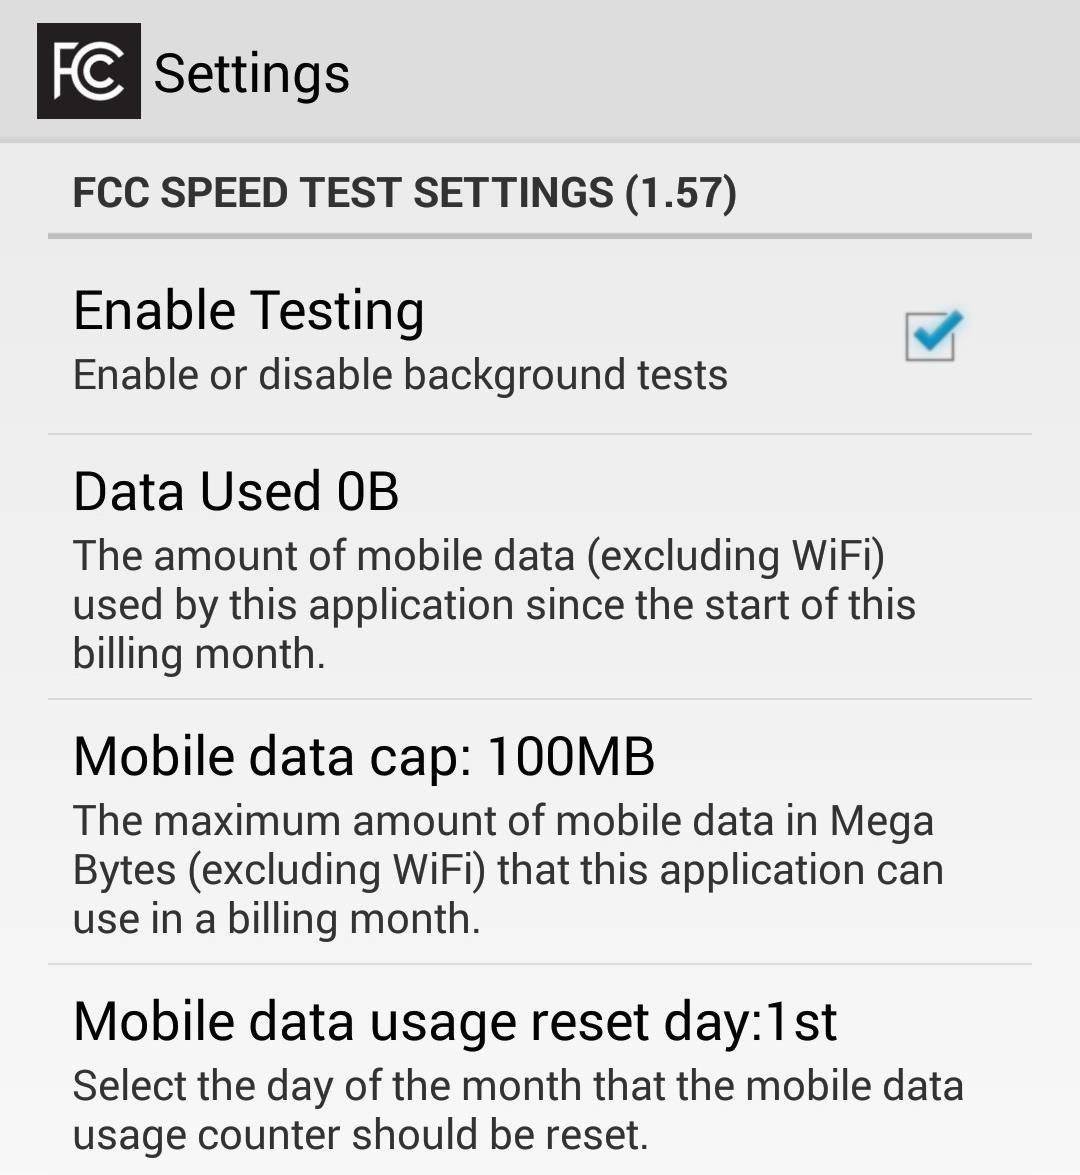 How to Measure Mobile Data & Wi-Fi Speeds on Your Samsung Galaxy Note 2 or Note 3